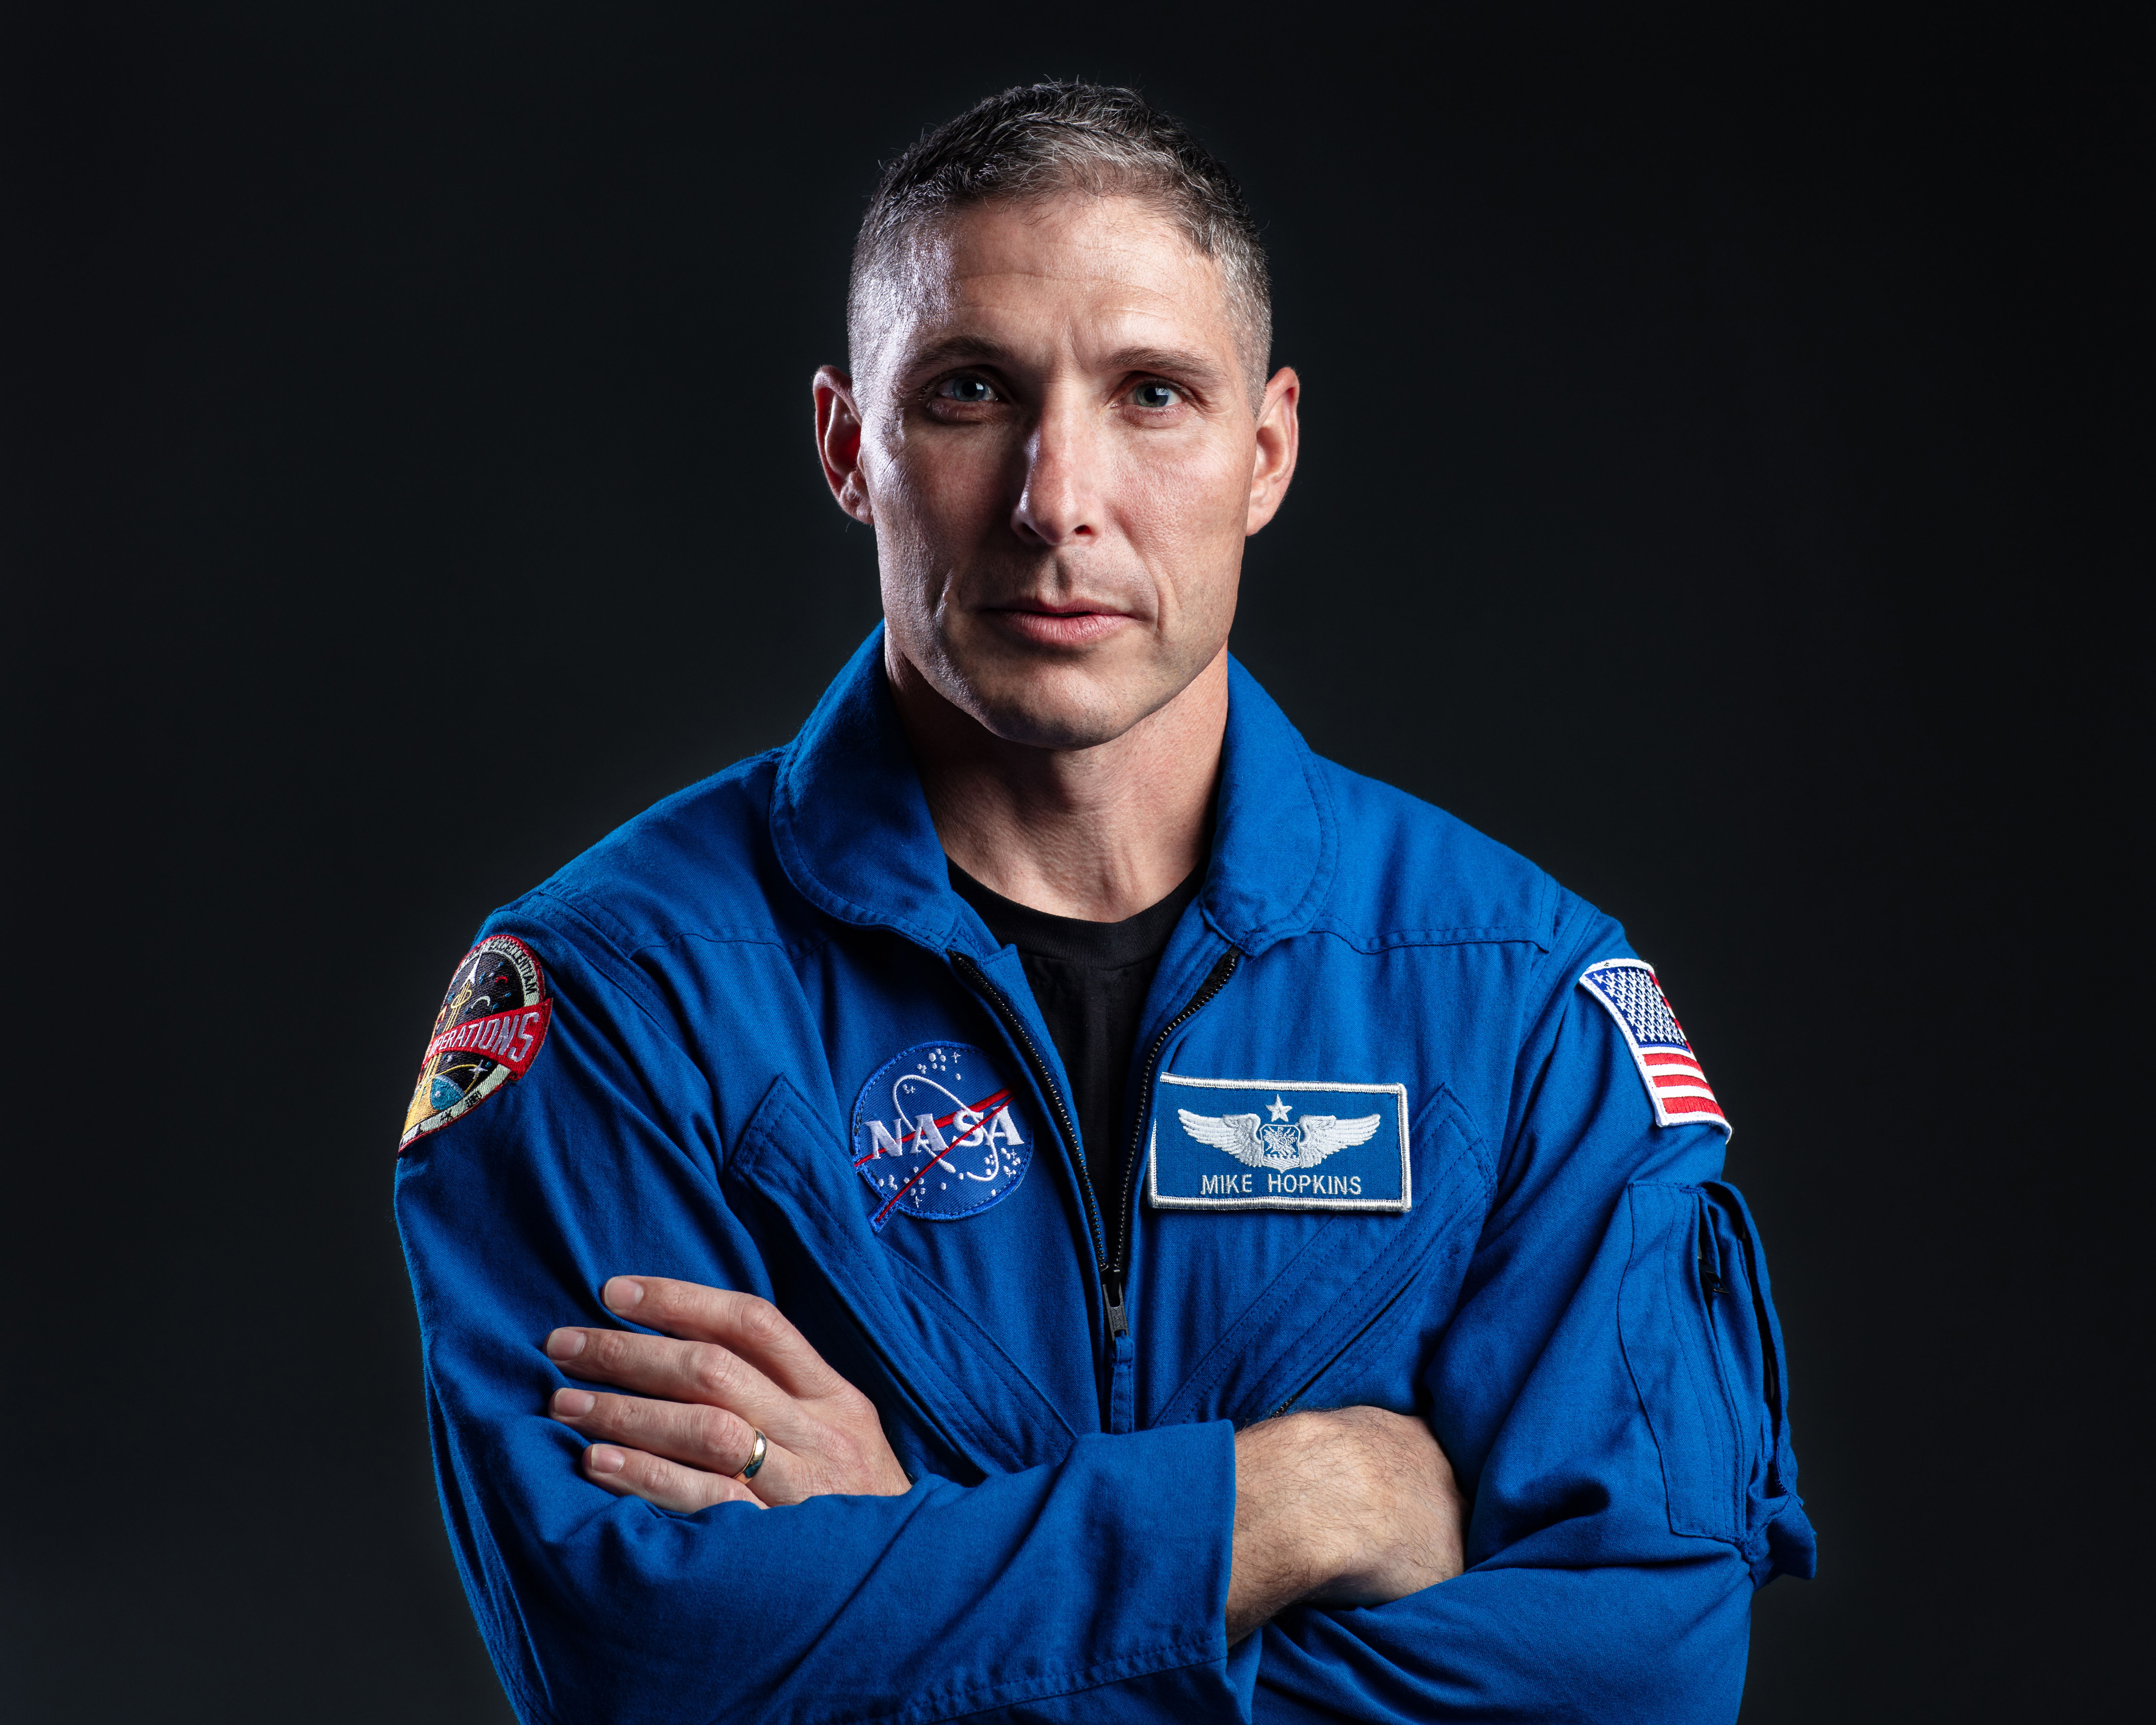 NASA's SpaceX Crew-1 Spacecraft Commander Mike Hopkins is photographed in his blue NASA flight suit.